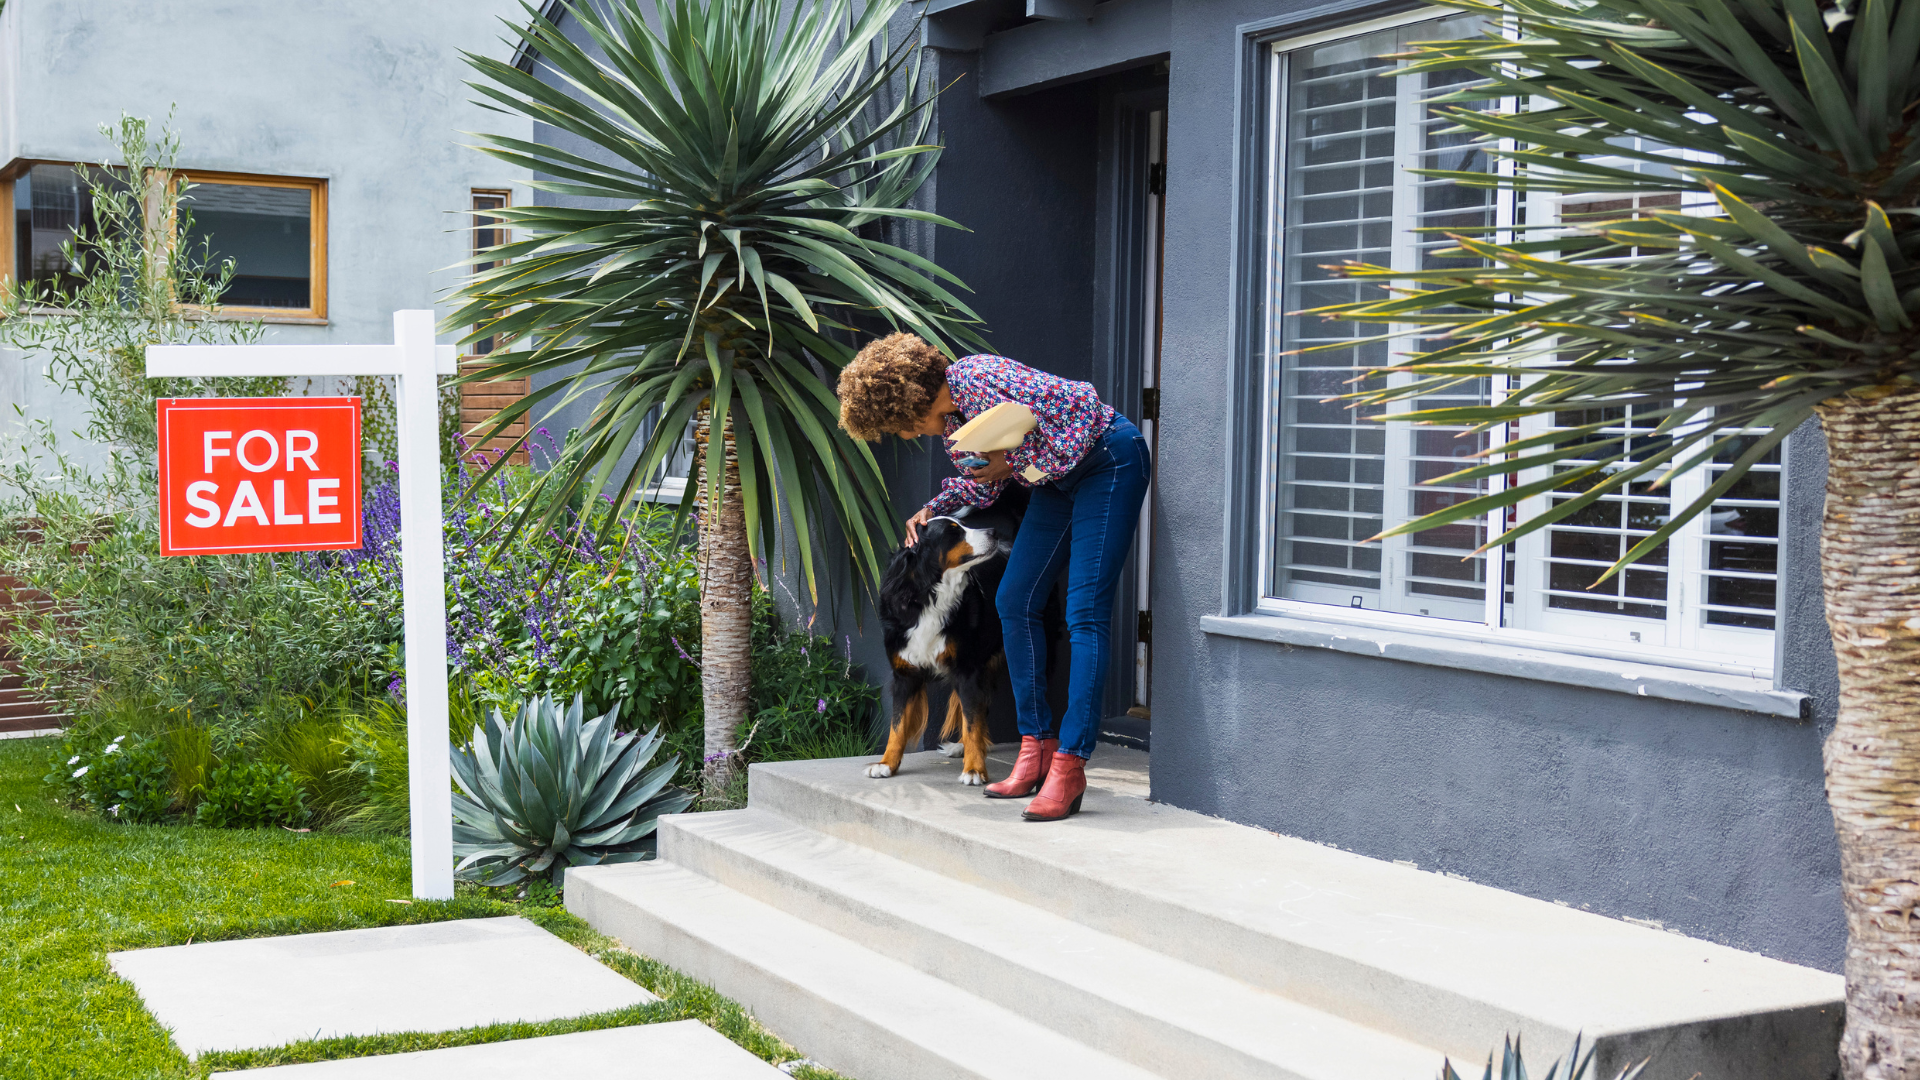 What to Do with Pets When Showing Your Home